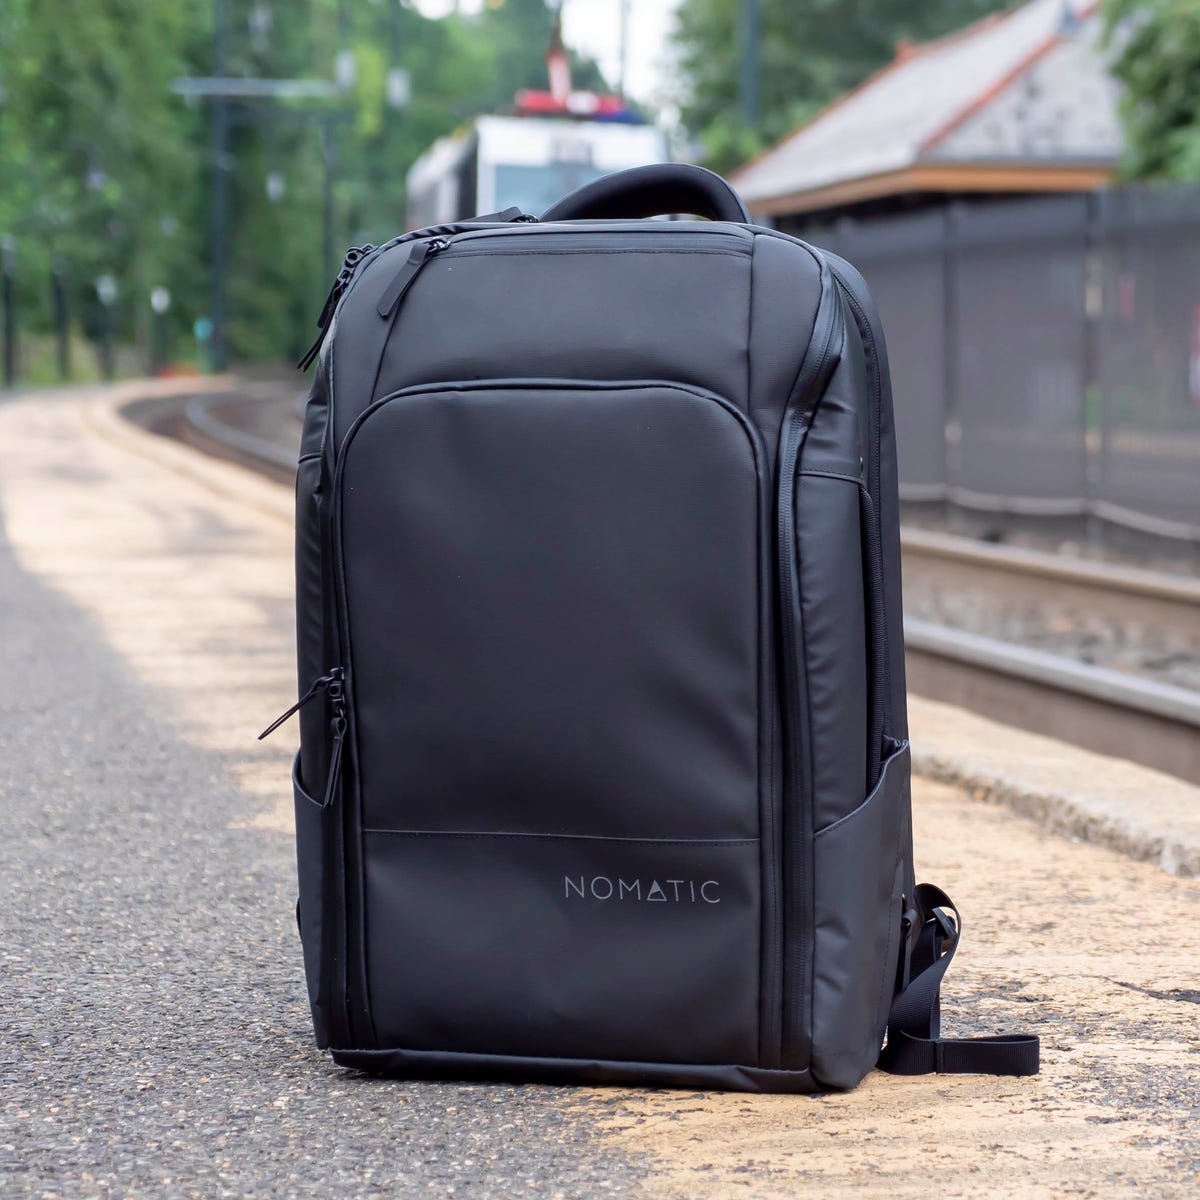 volatility assist unfathomable Best Laptop Backpack for 2023 - CNET